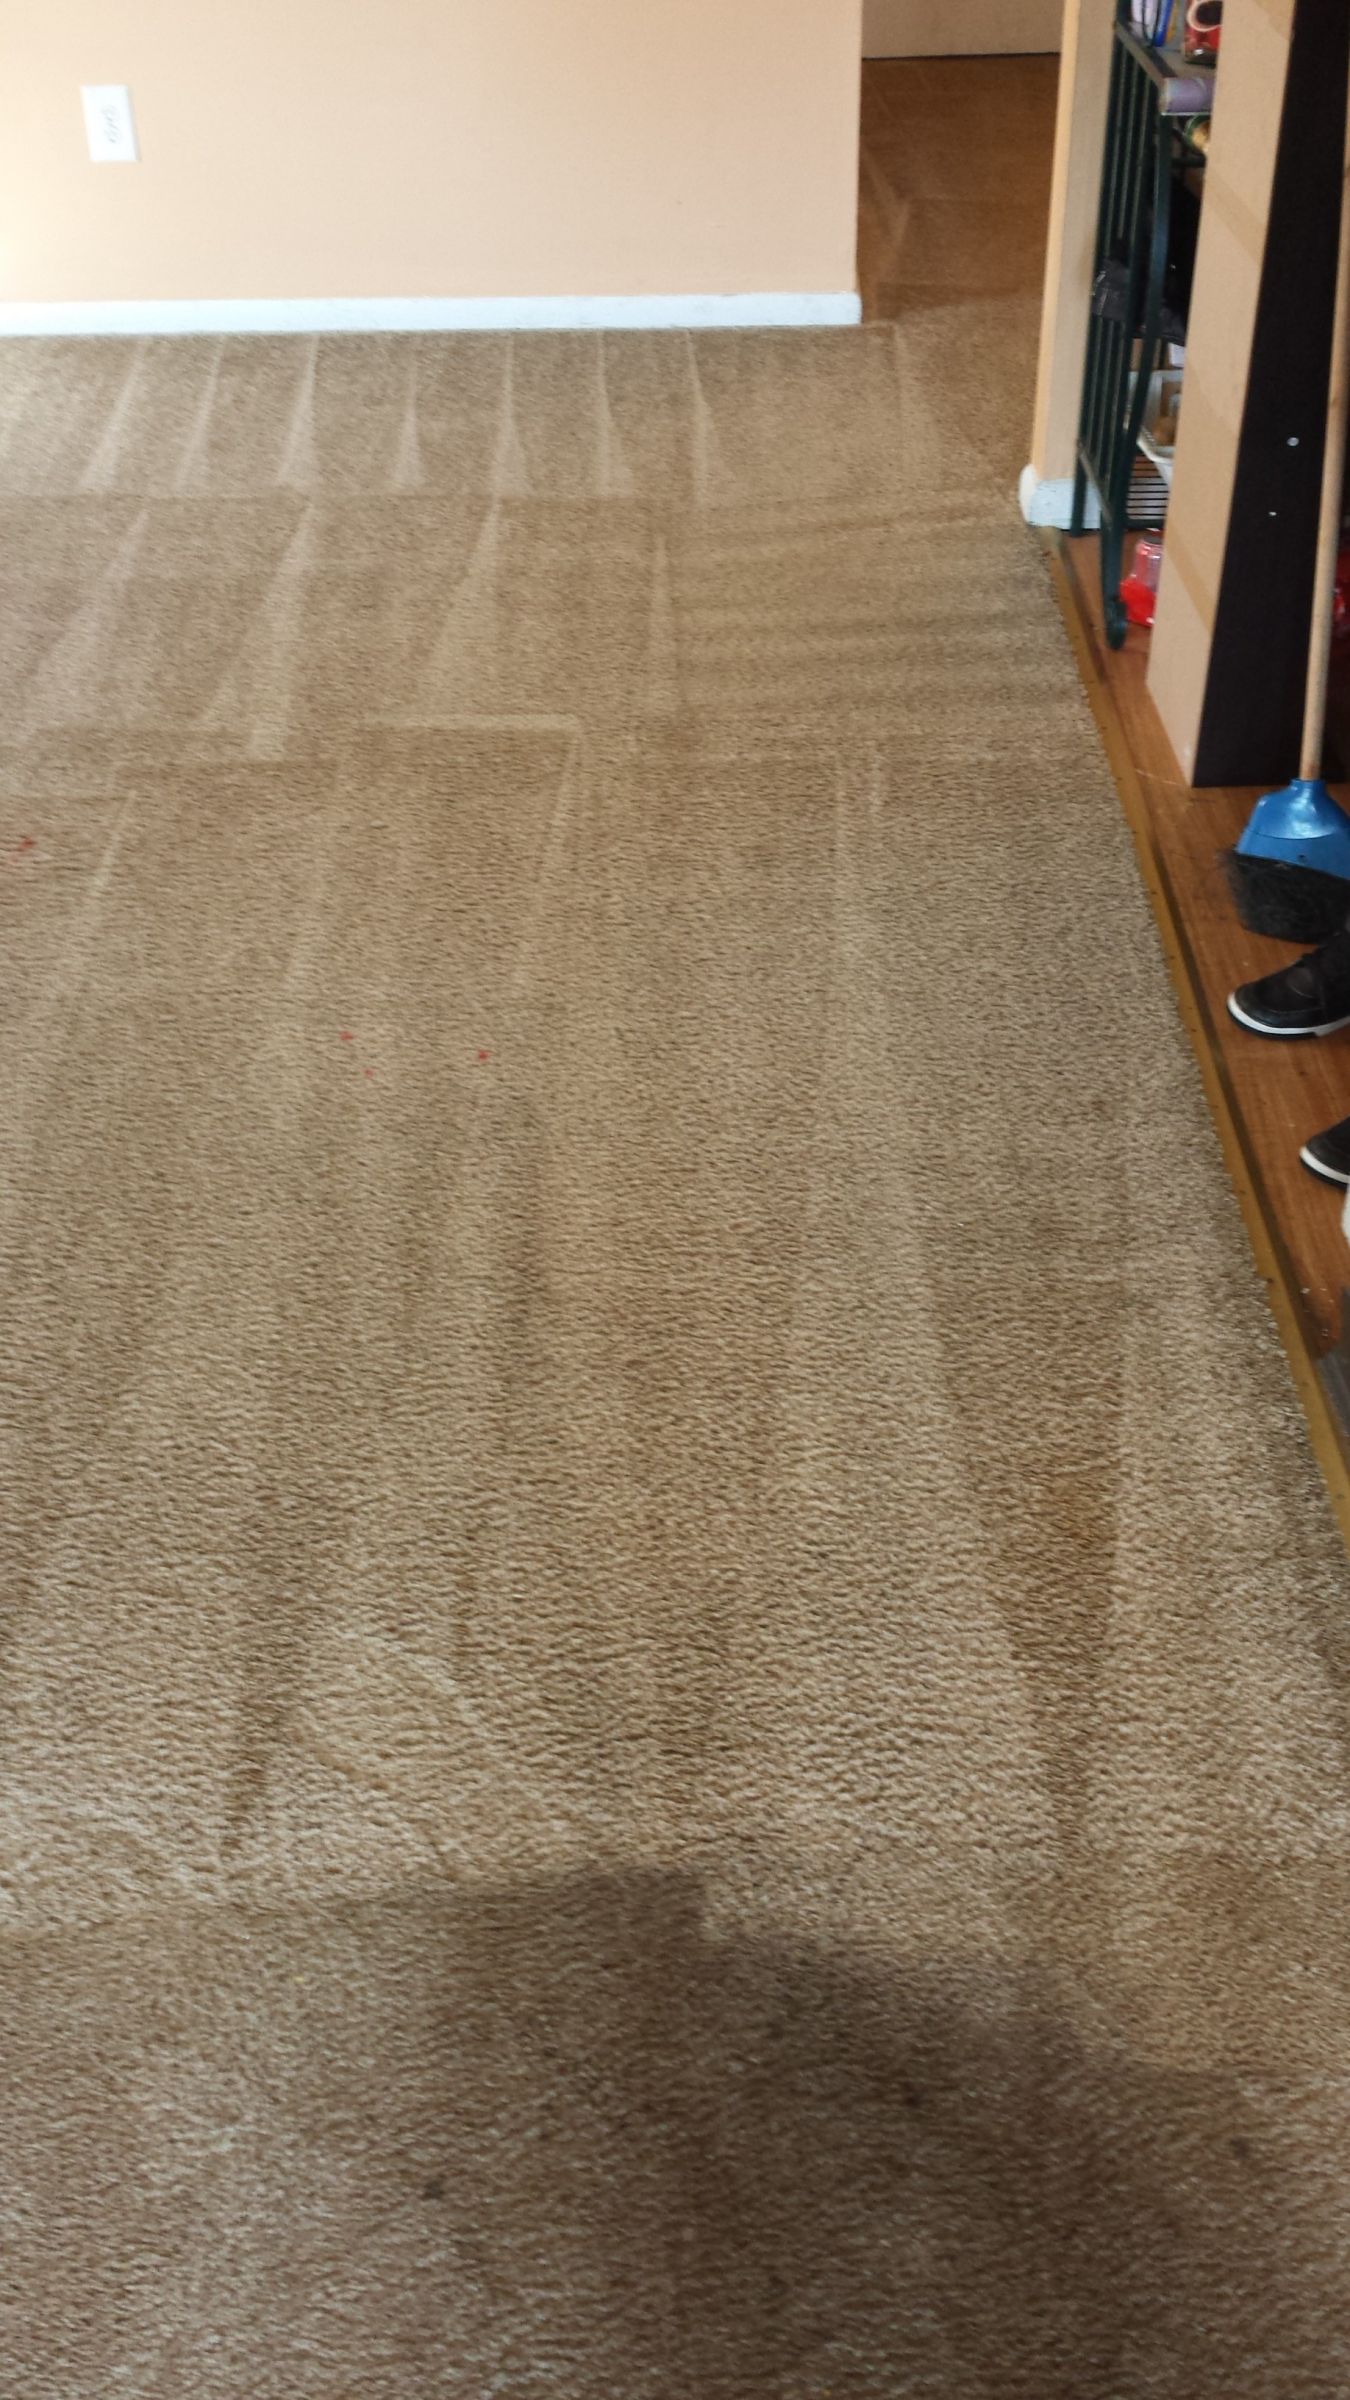 Haddonfield Carpet Cleaning. How Often to Clean Carpet